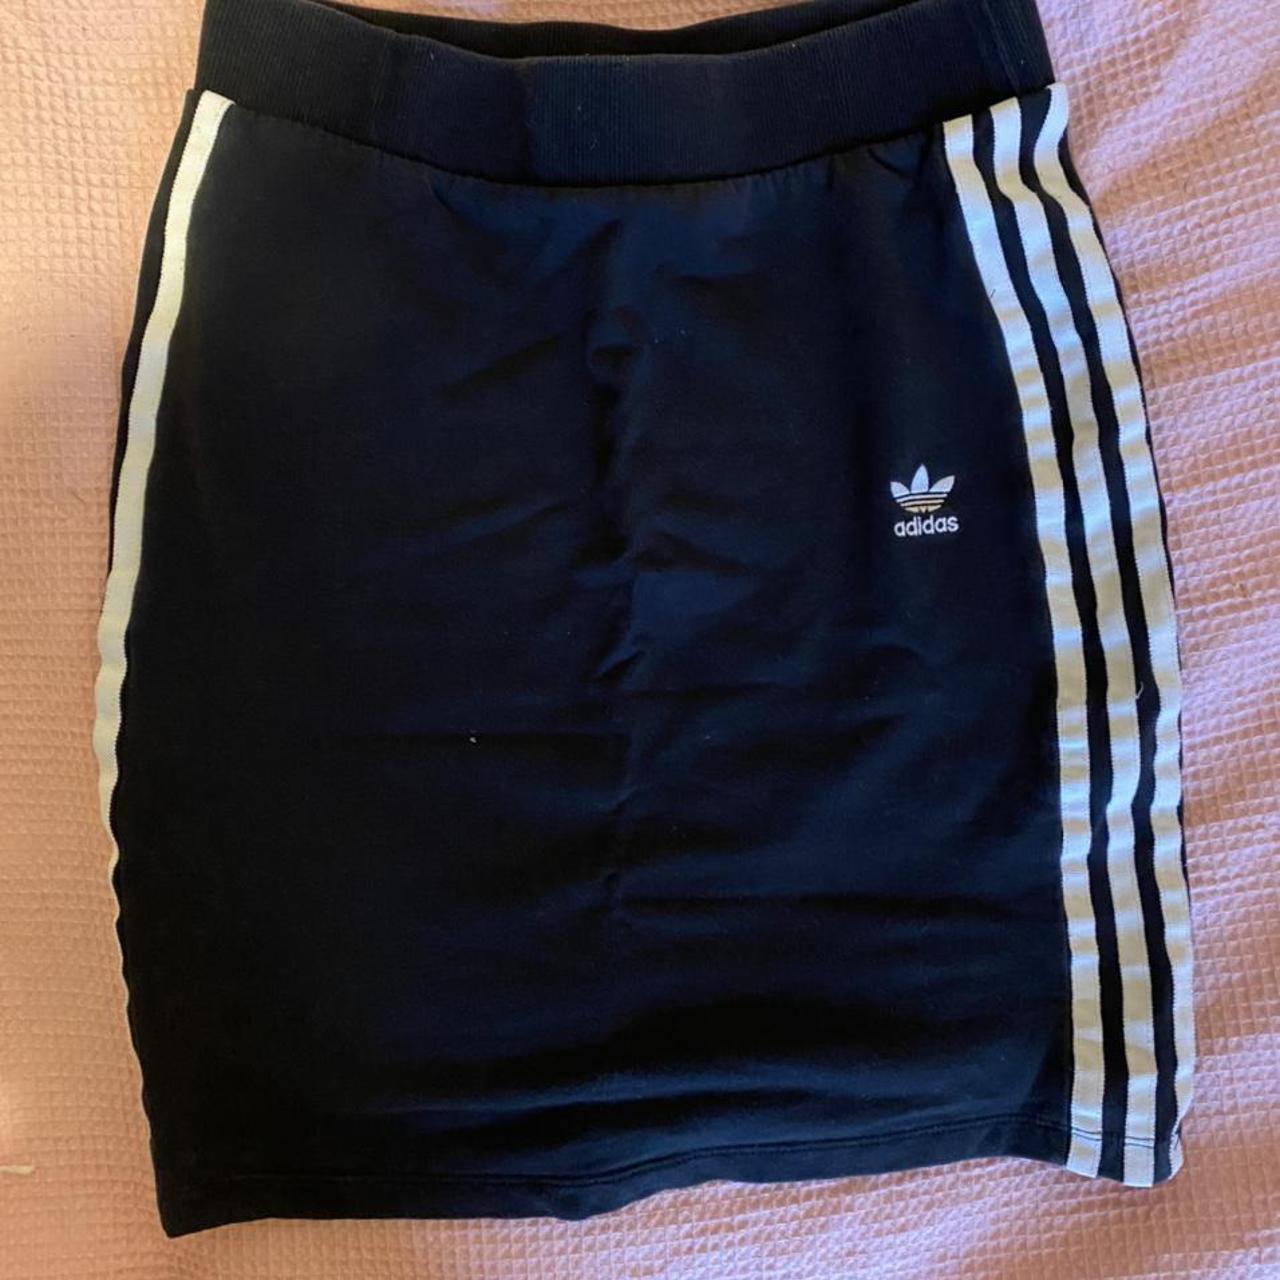 Adidas 3 stripe skirt in size 8. So flattering and... - Depop